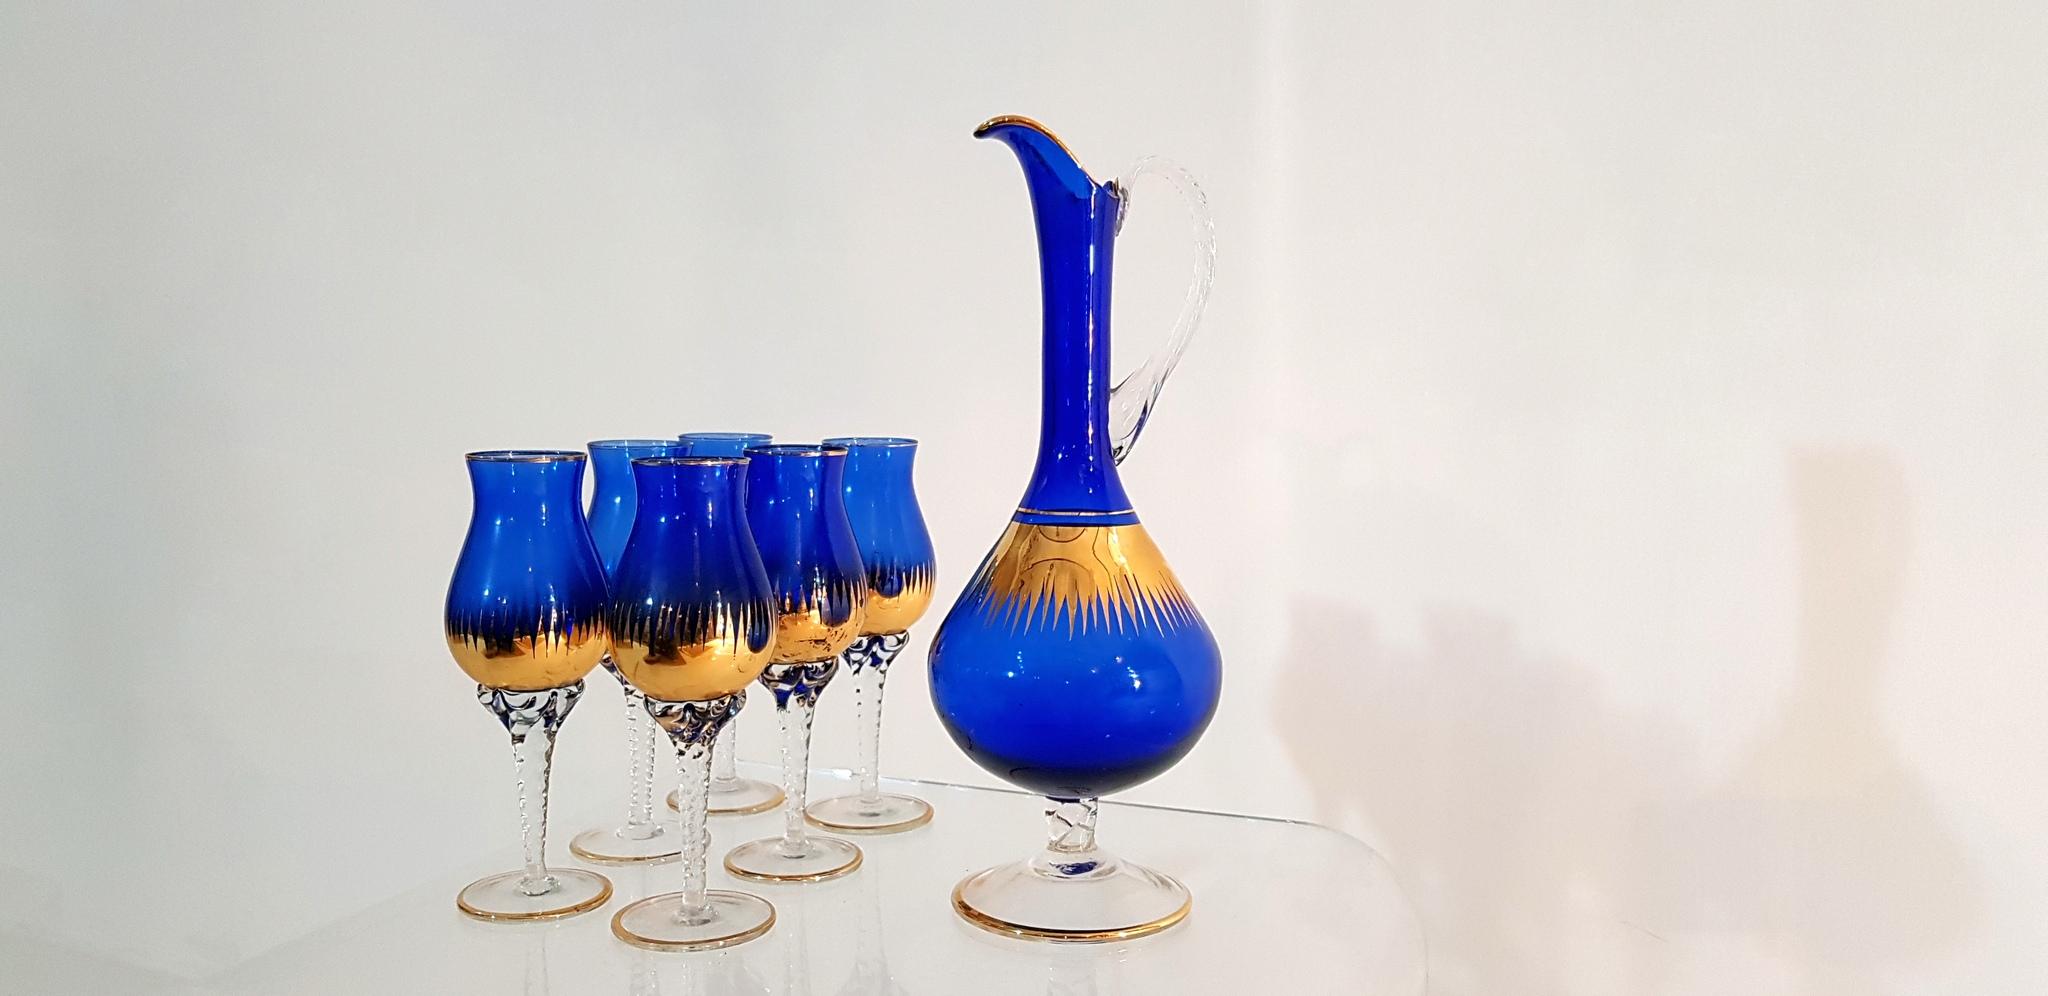 Set of six glasses and pitcher produced in Venice Italy during the 1950s. Made from cobalt blue glass and decorated with 24-carat gold. The glasses and pitcher have stems and handle in twisted clear glass contrasting against the blue and